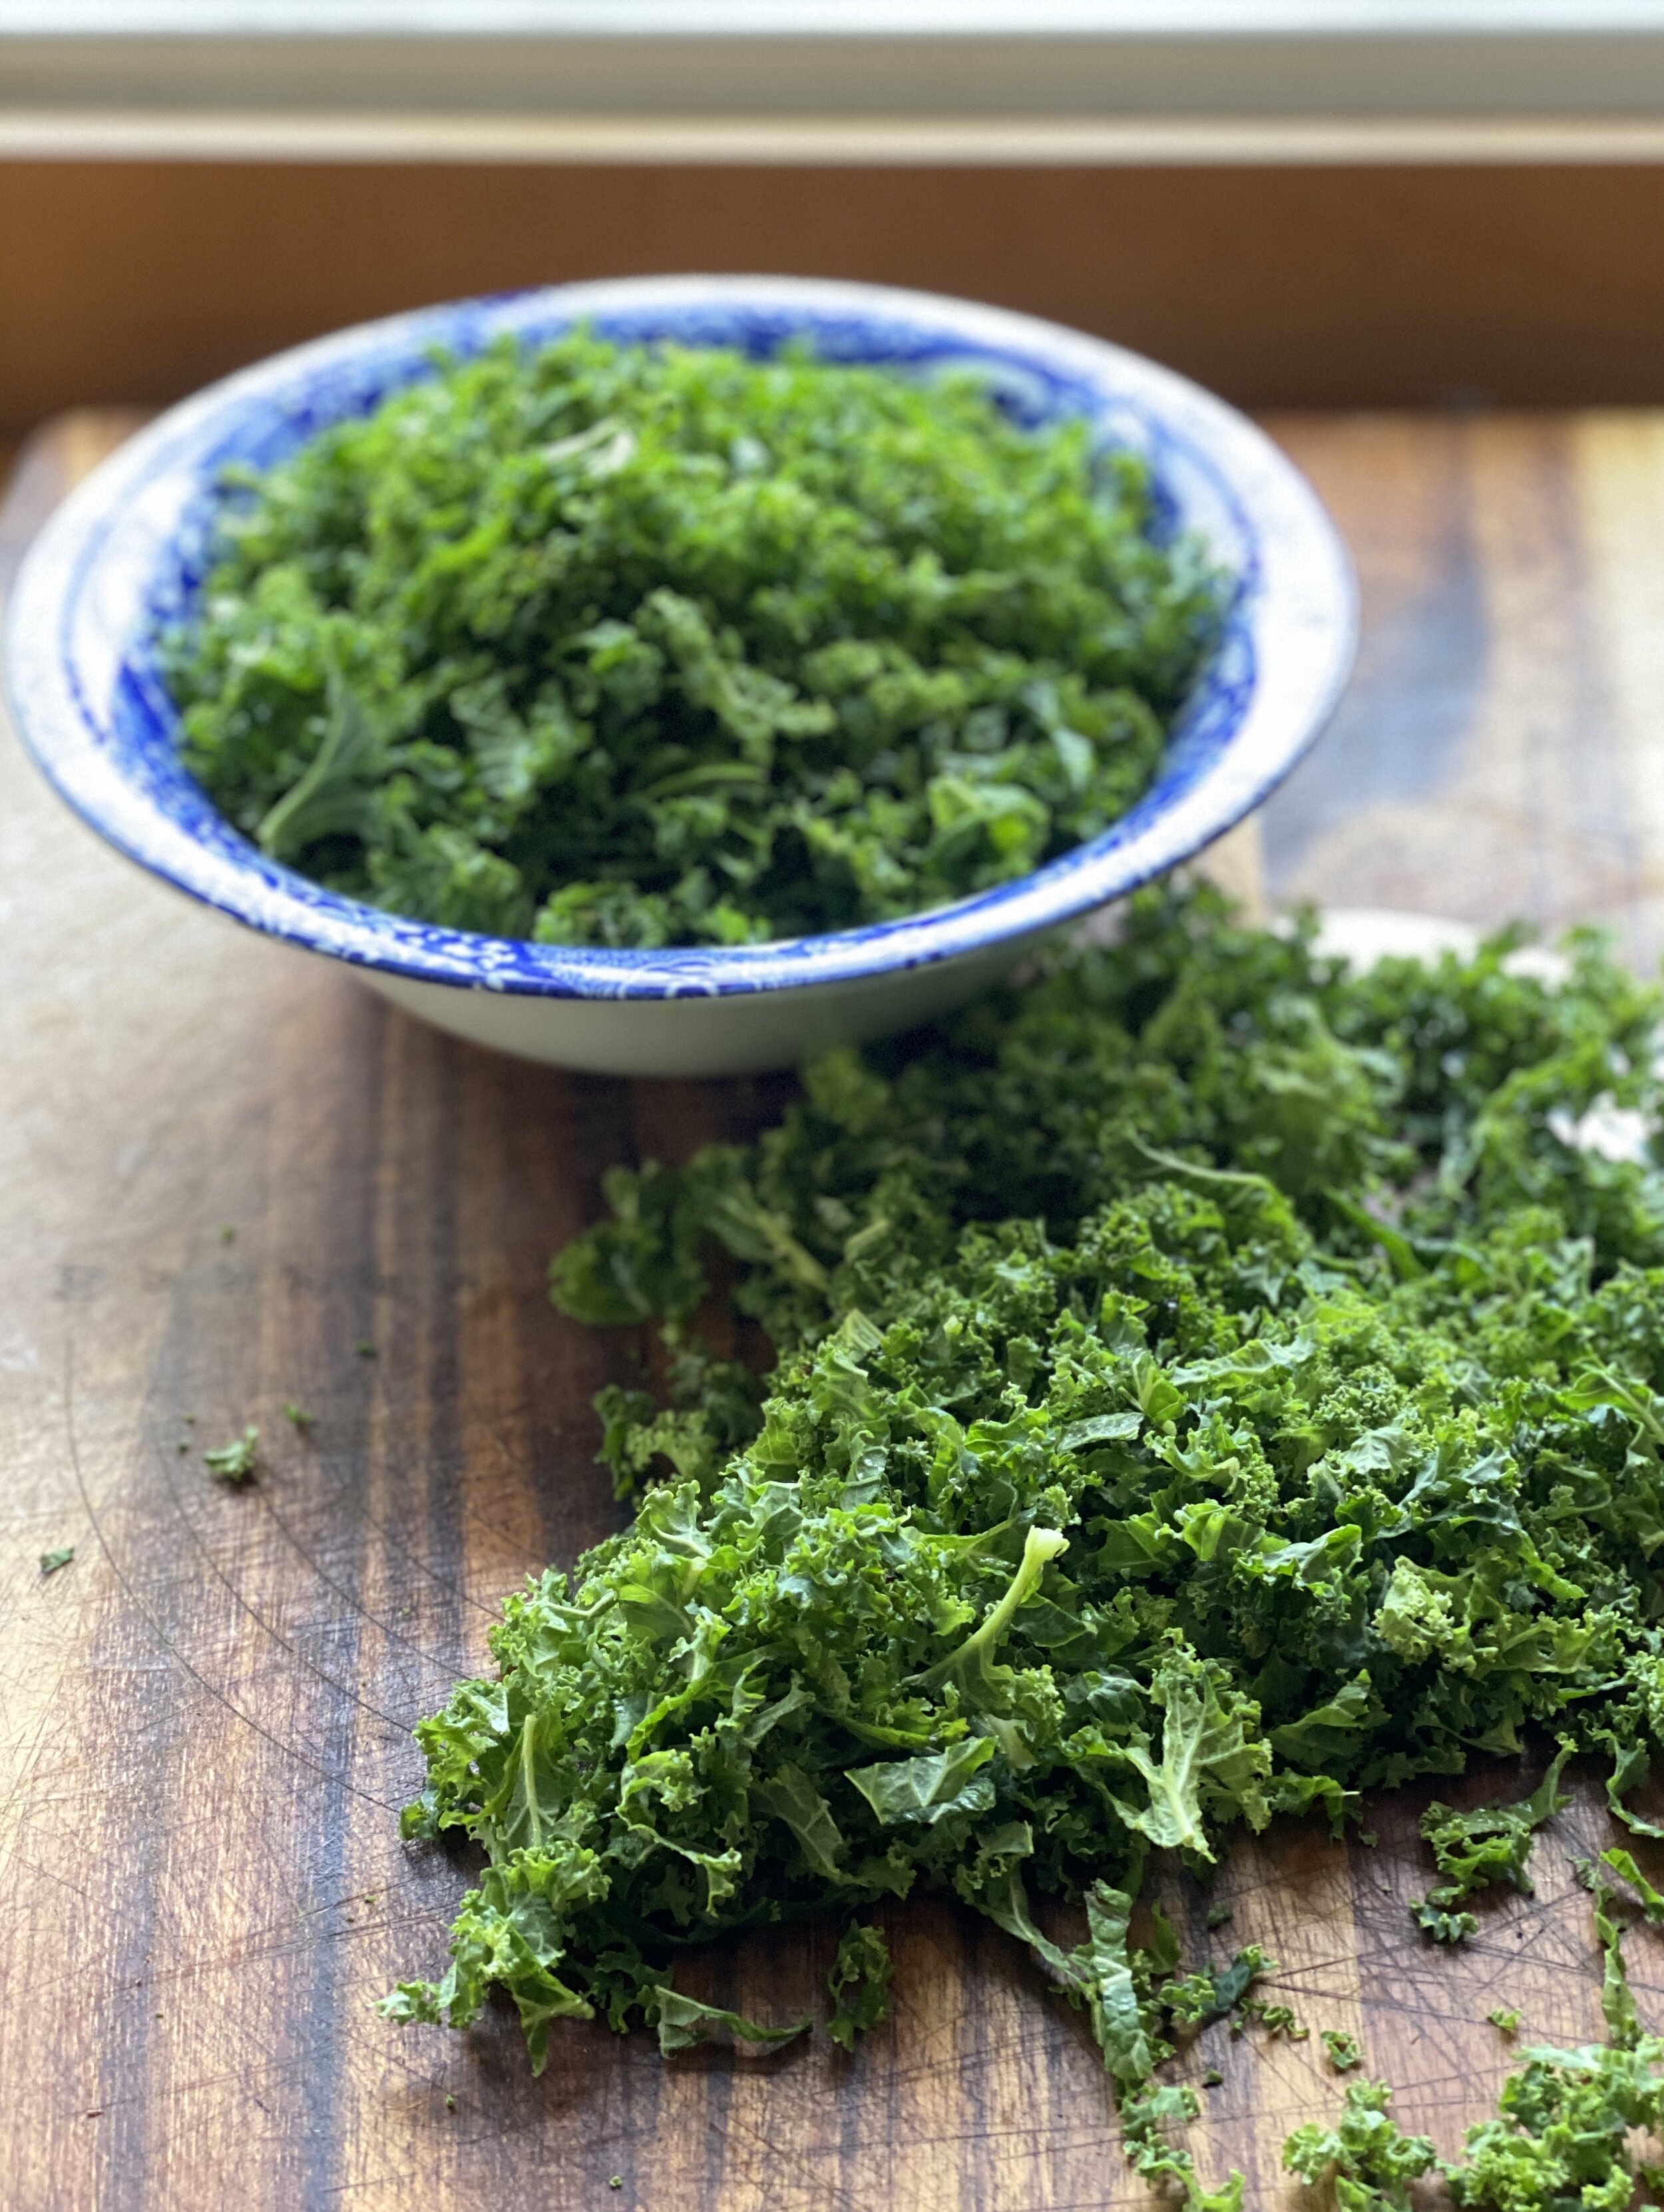 Curly kale chopped and place in a salad bowl